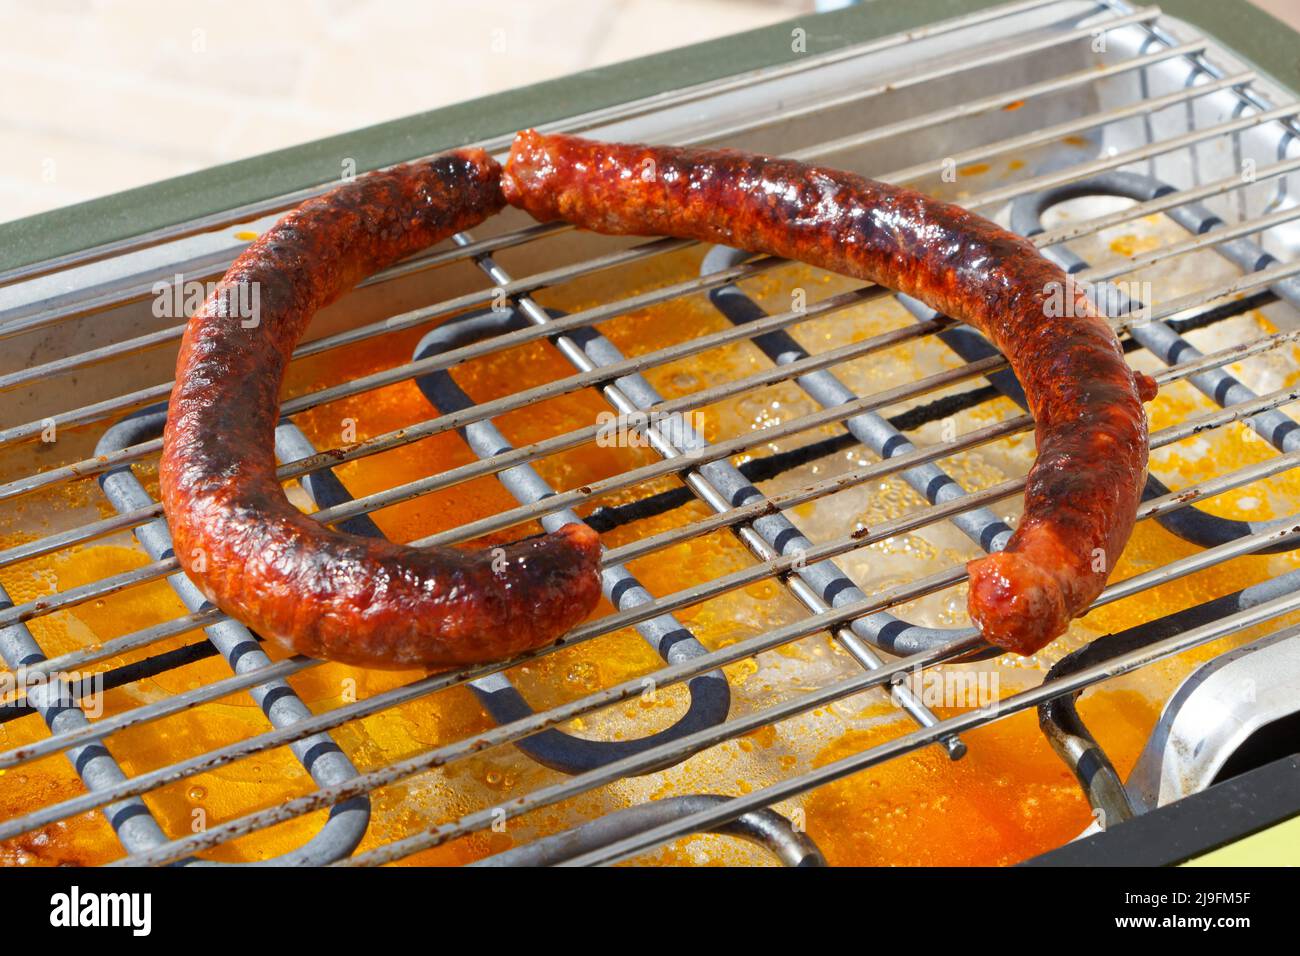 Merguez on the grid of an electric barbecue Stock Photo